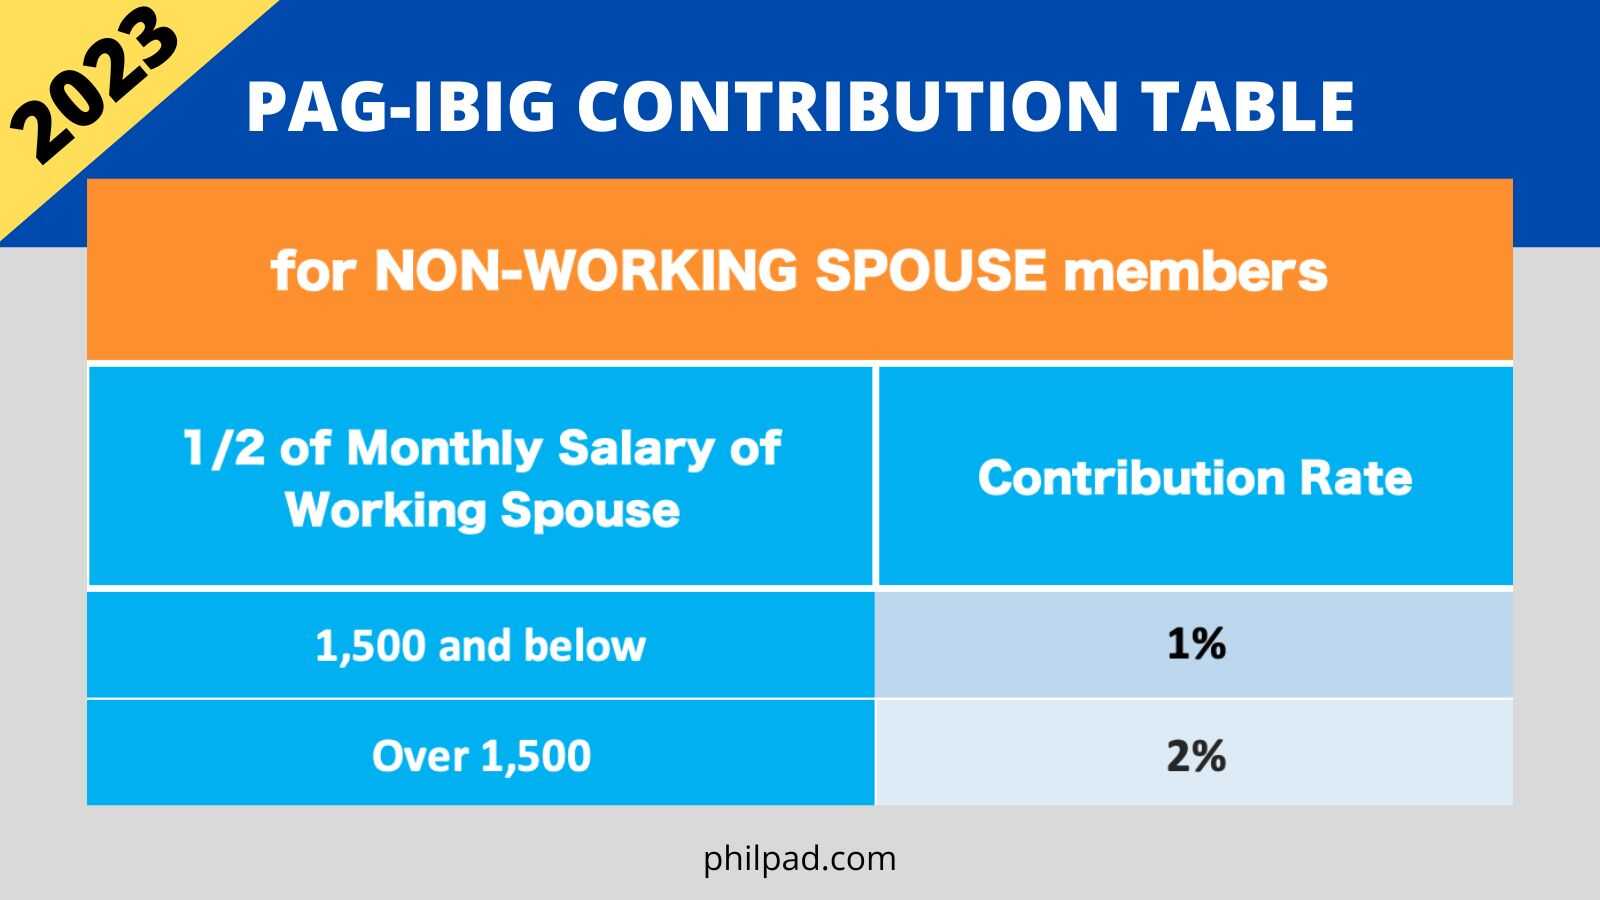 hdmf contributions for non working spouse member